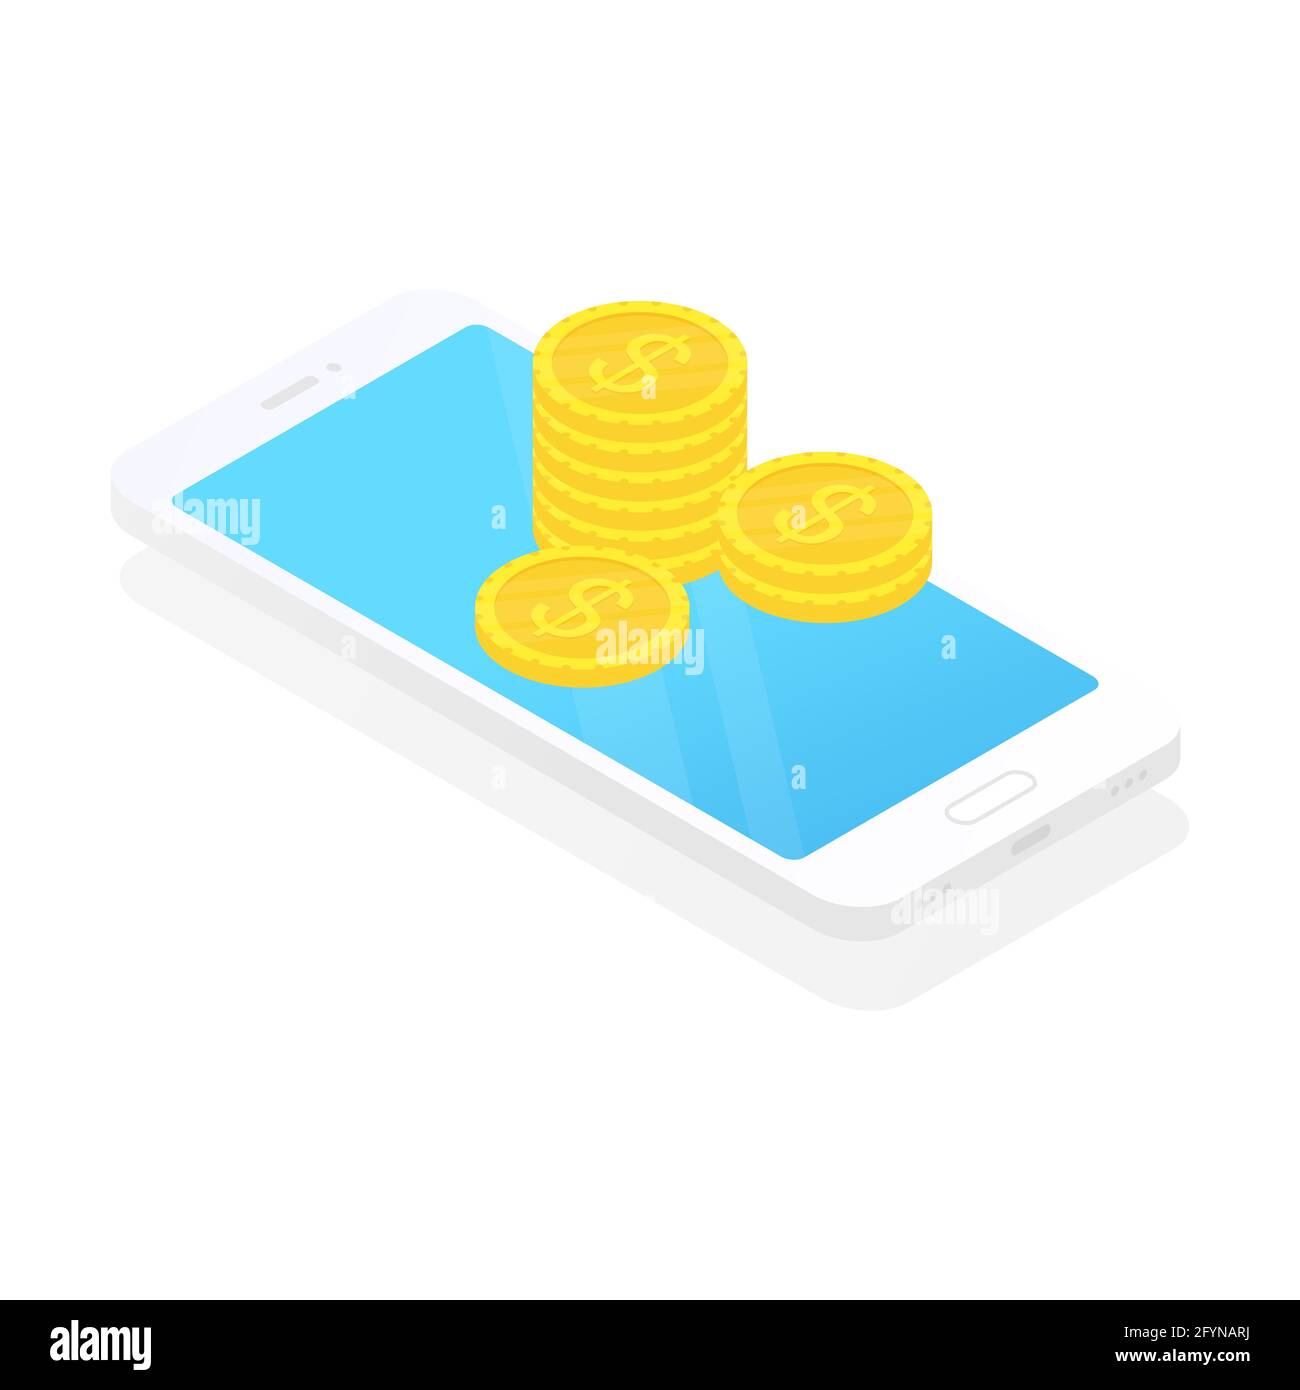 Phone with money. Coins transfer concept. Flat isometric illustration. Exchange electronic money. Stock Vector